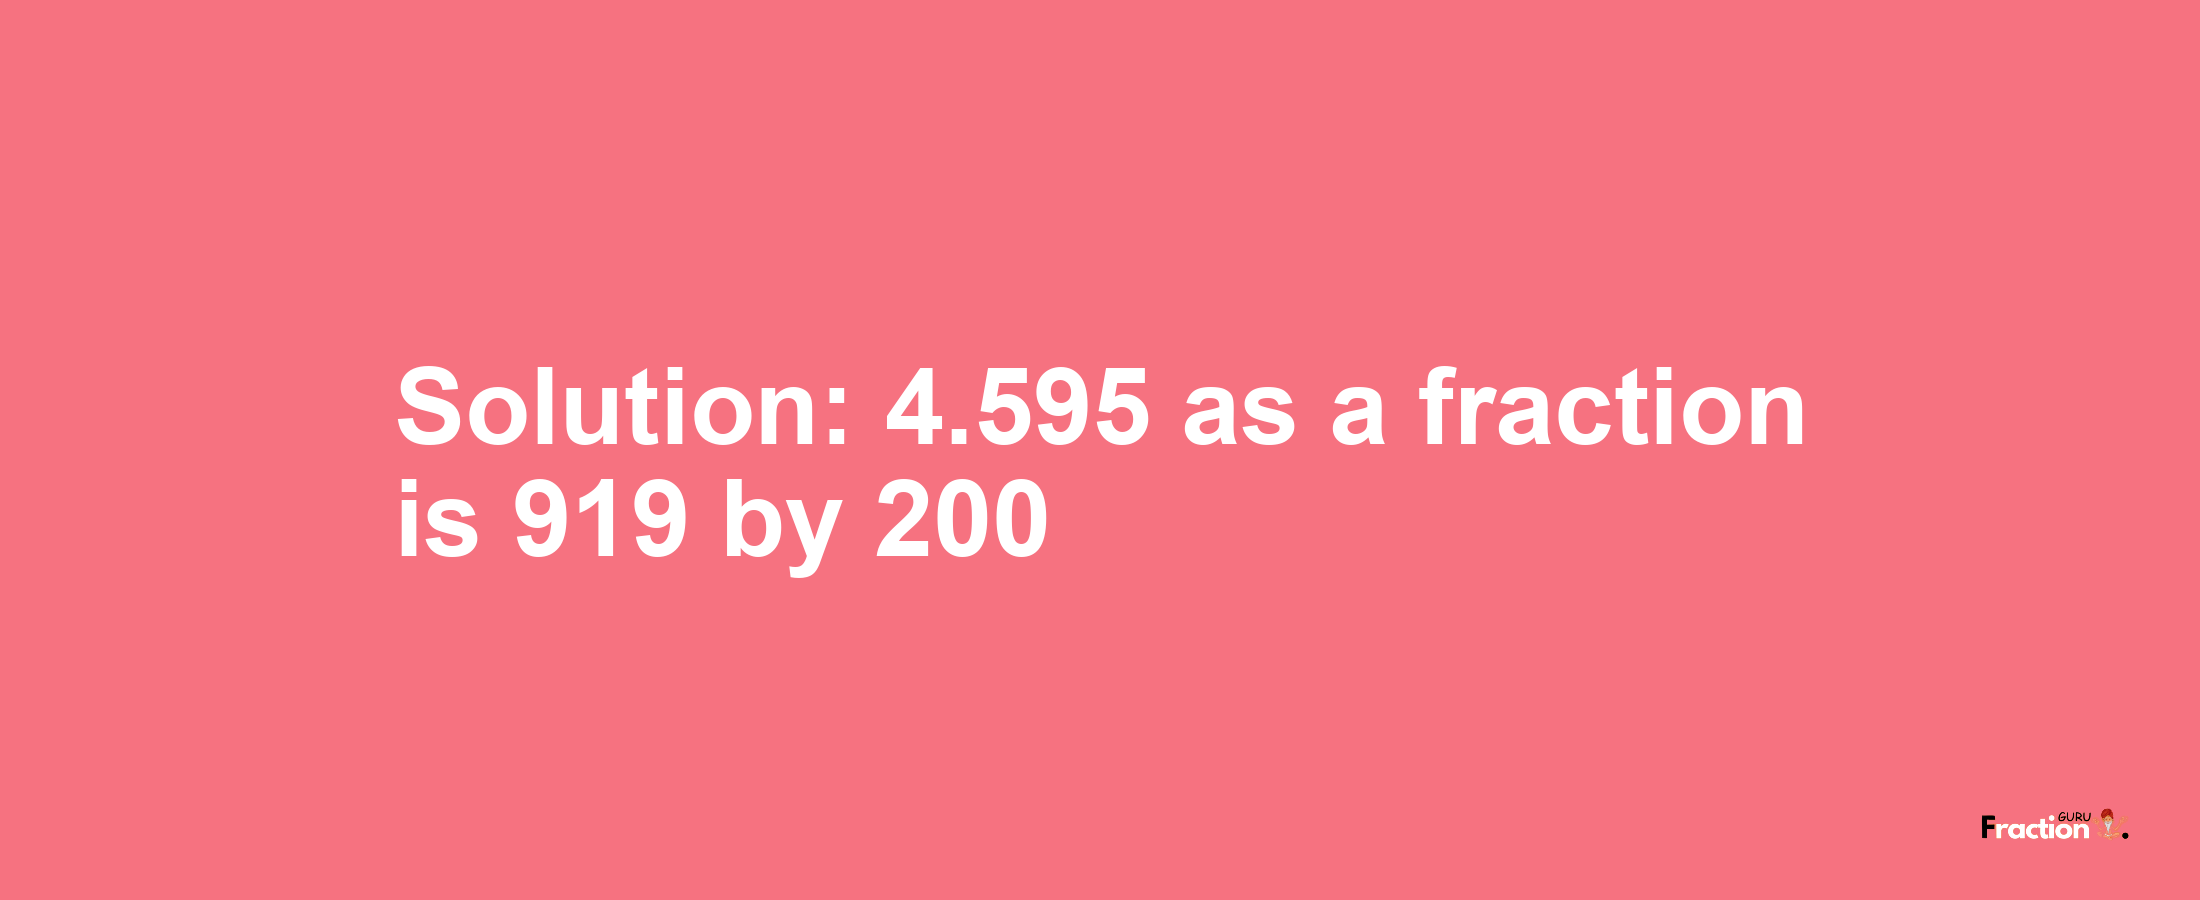 Solution:4.595 as a fraction is 919/200